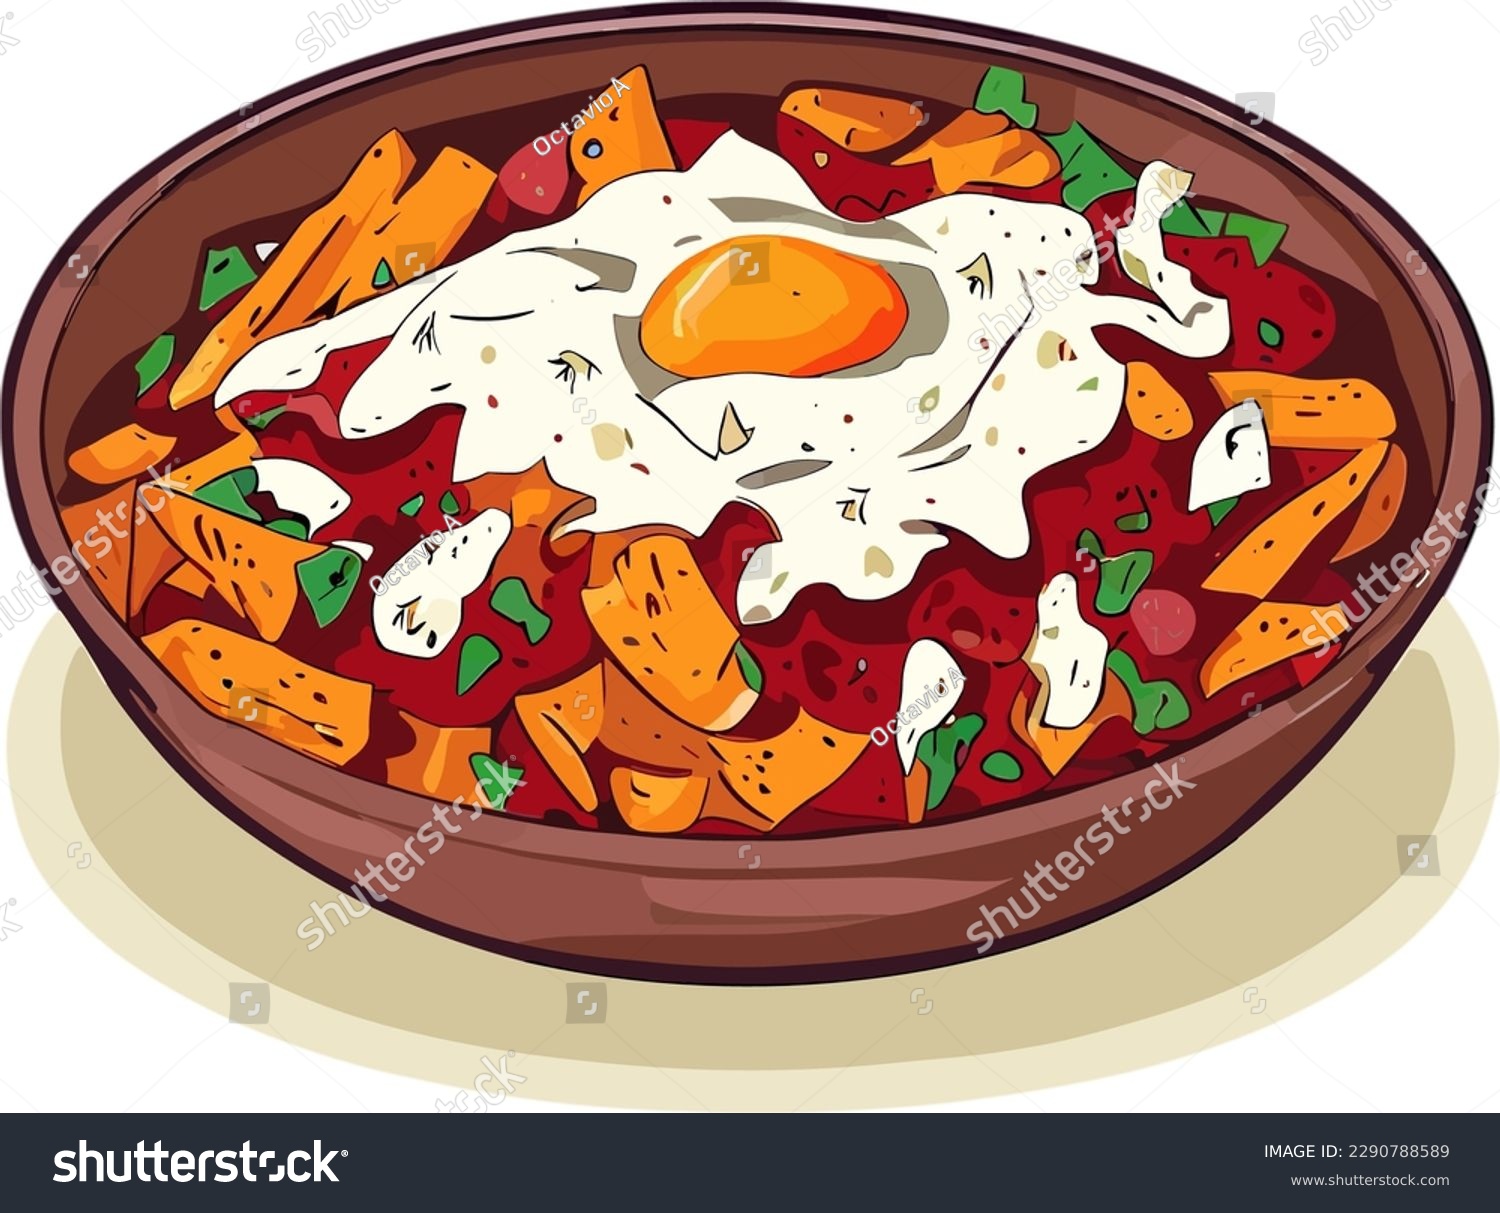 Chilaquiles plate dish, mexican food, tortillas - Royalty Free Stock ...